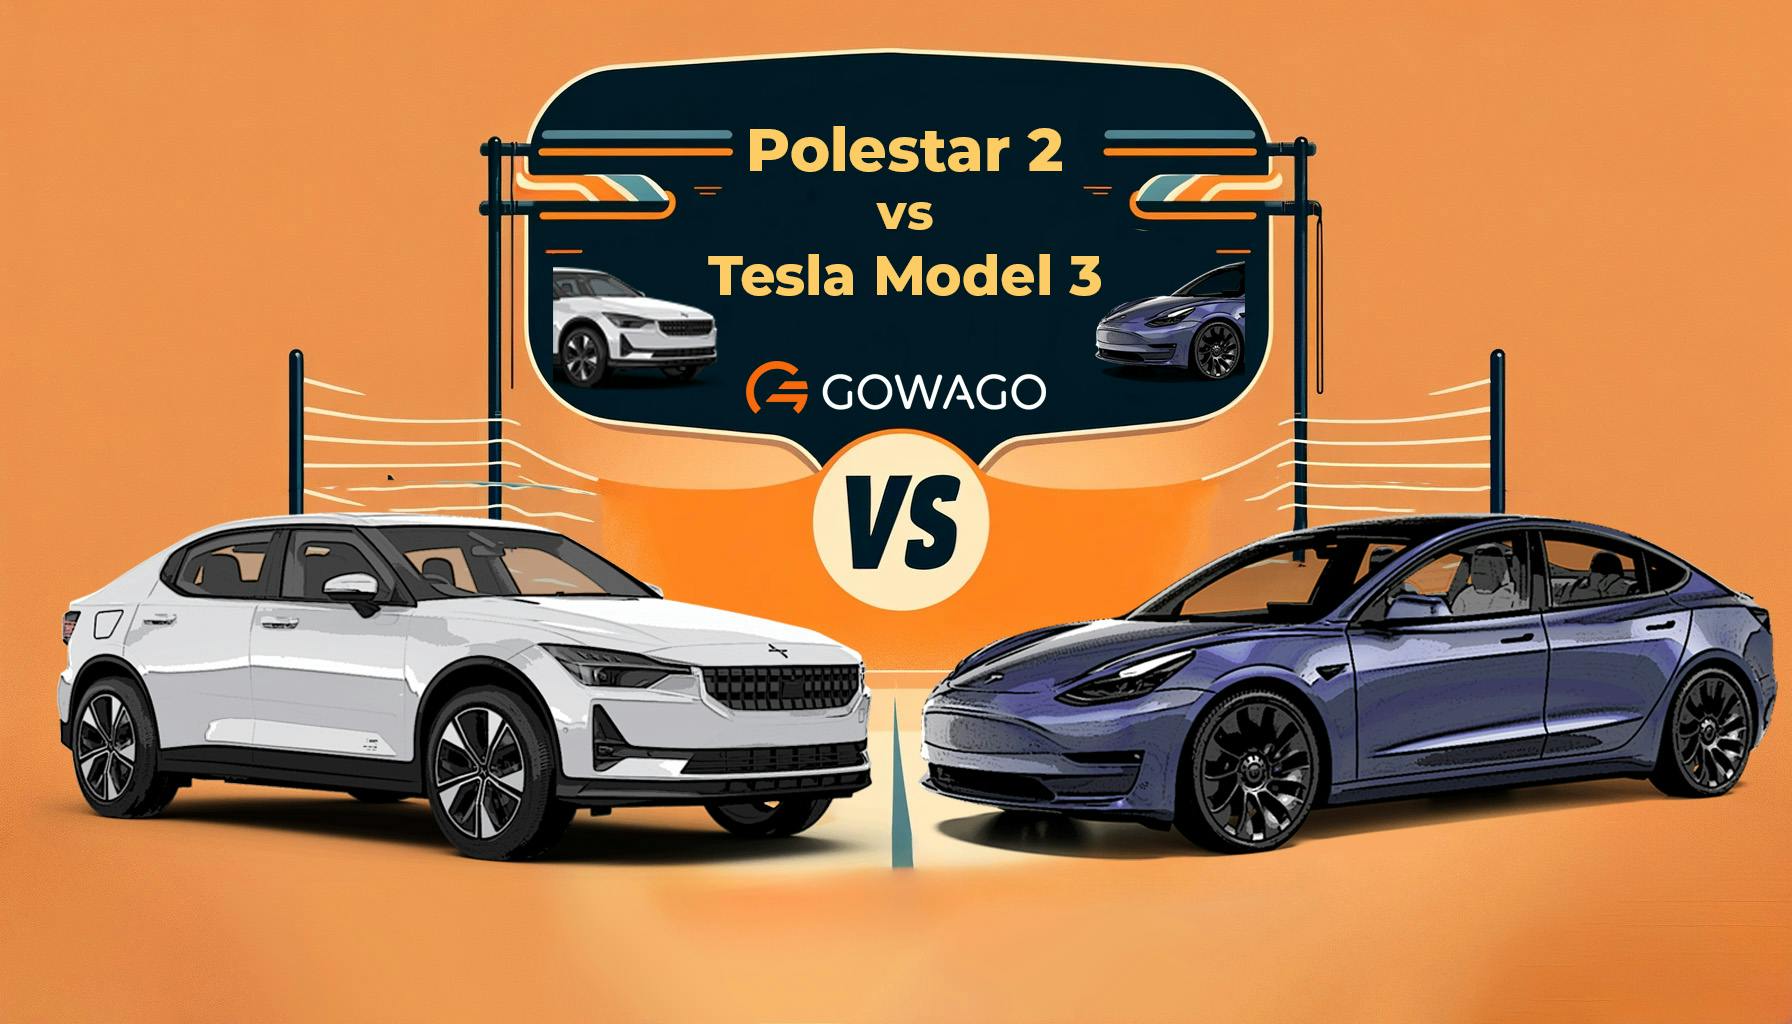 blog item card - Tesla Model 3 or Polestar 2? Which electric car should you choose? gowago gives you an overview!